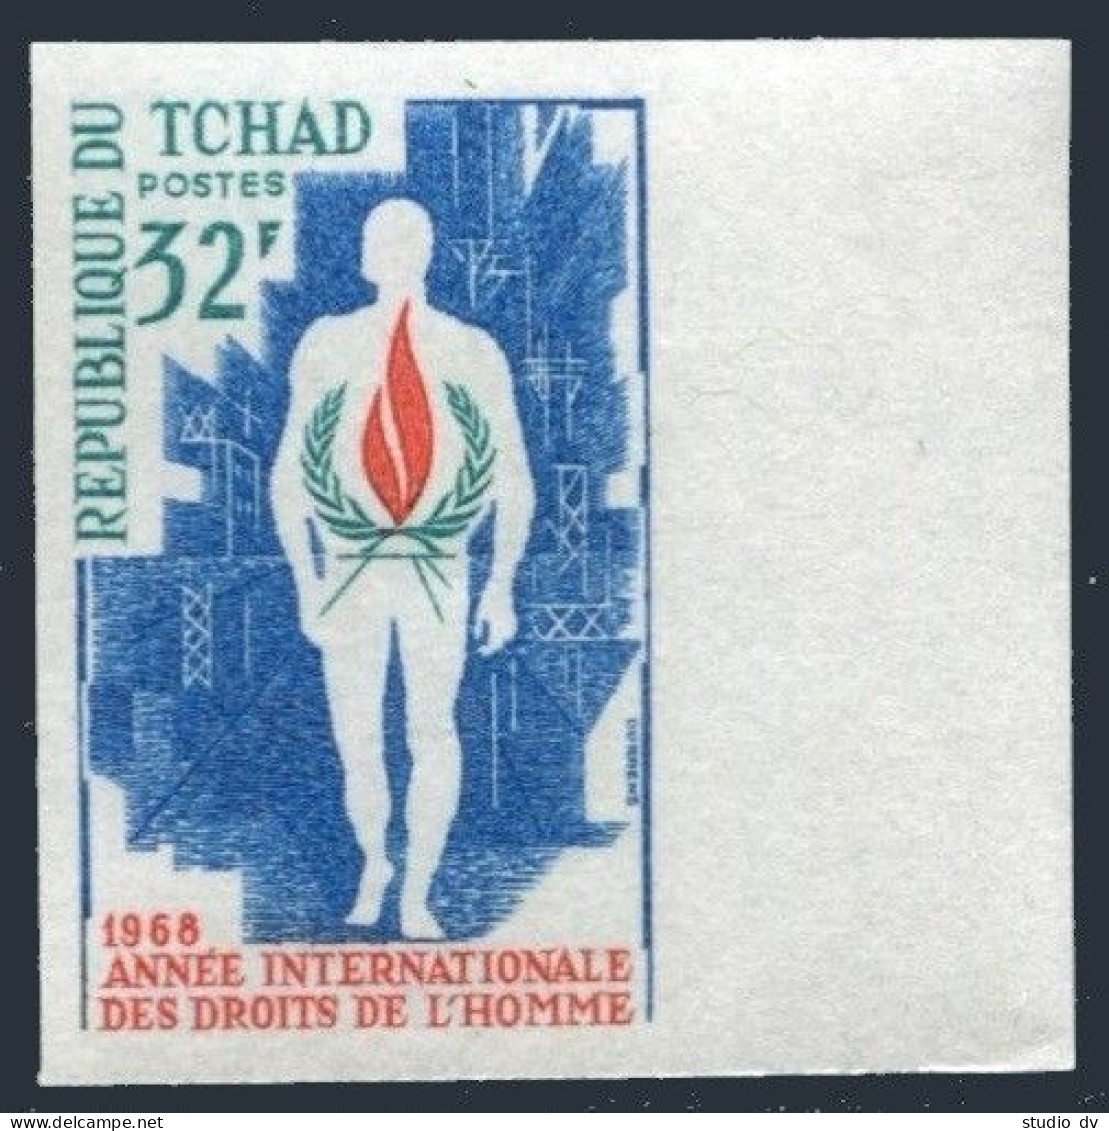 Chad 167 Imperf,MNH.Michel 217. Human Rights Year IHRY-1968. - Chad (1960-...)